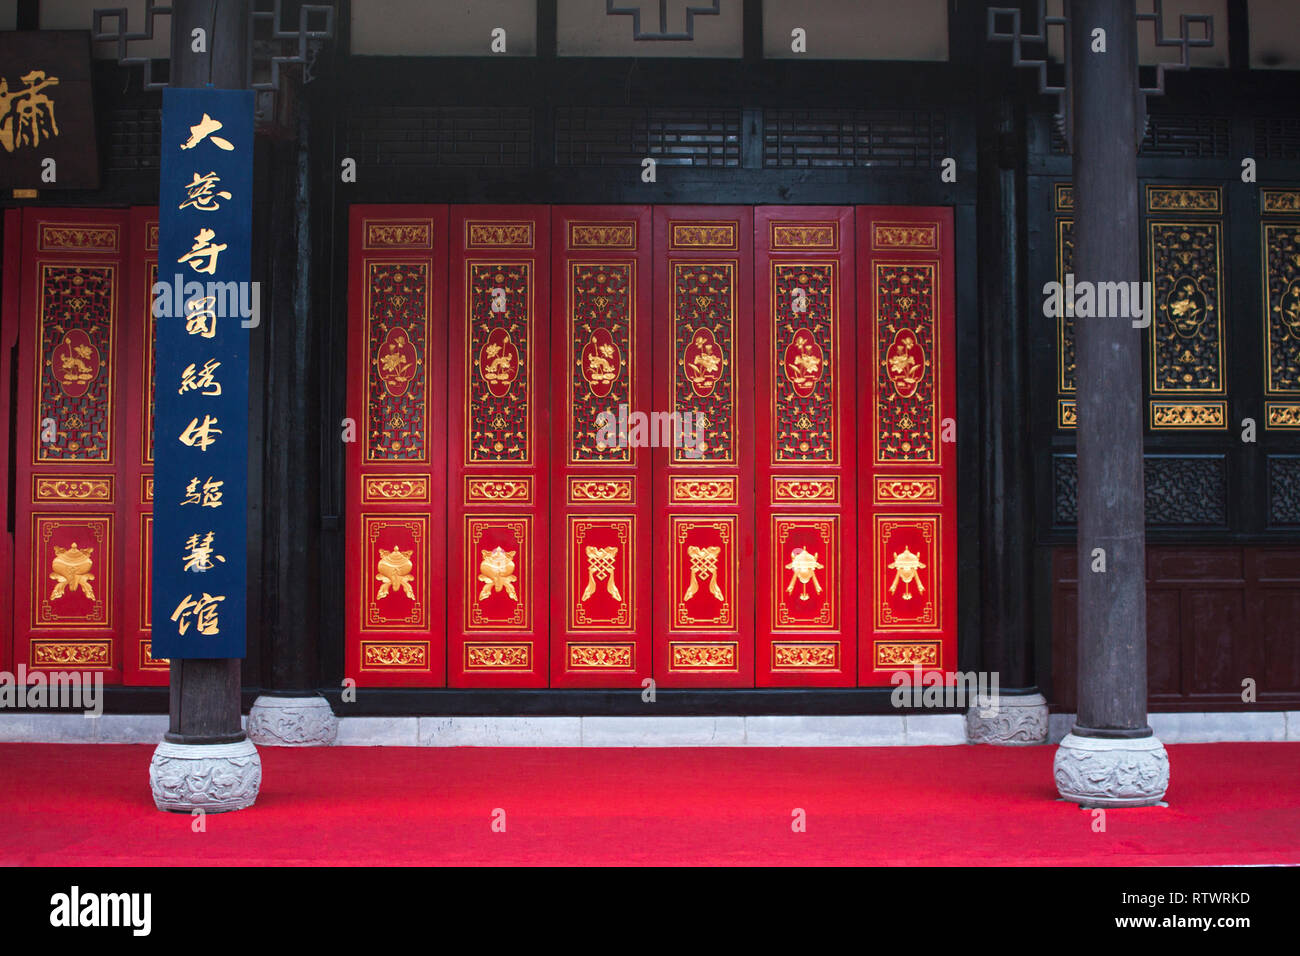 Chinese Wooden Doors with Decorated Panels and Windows. Stock Photo